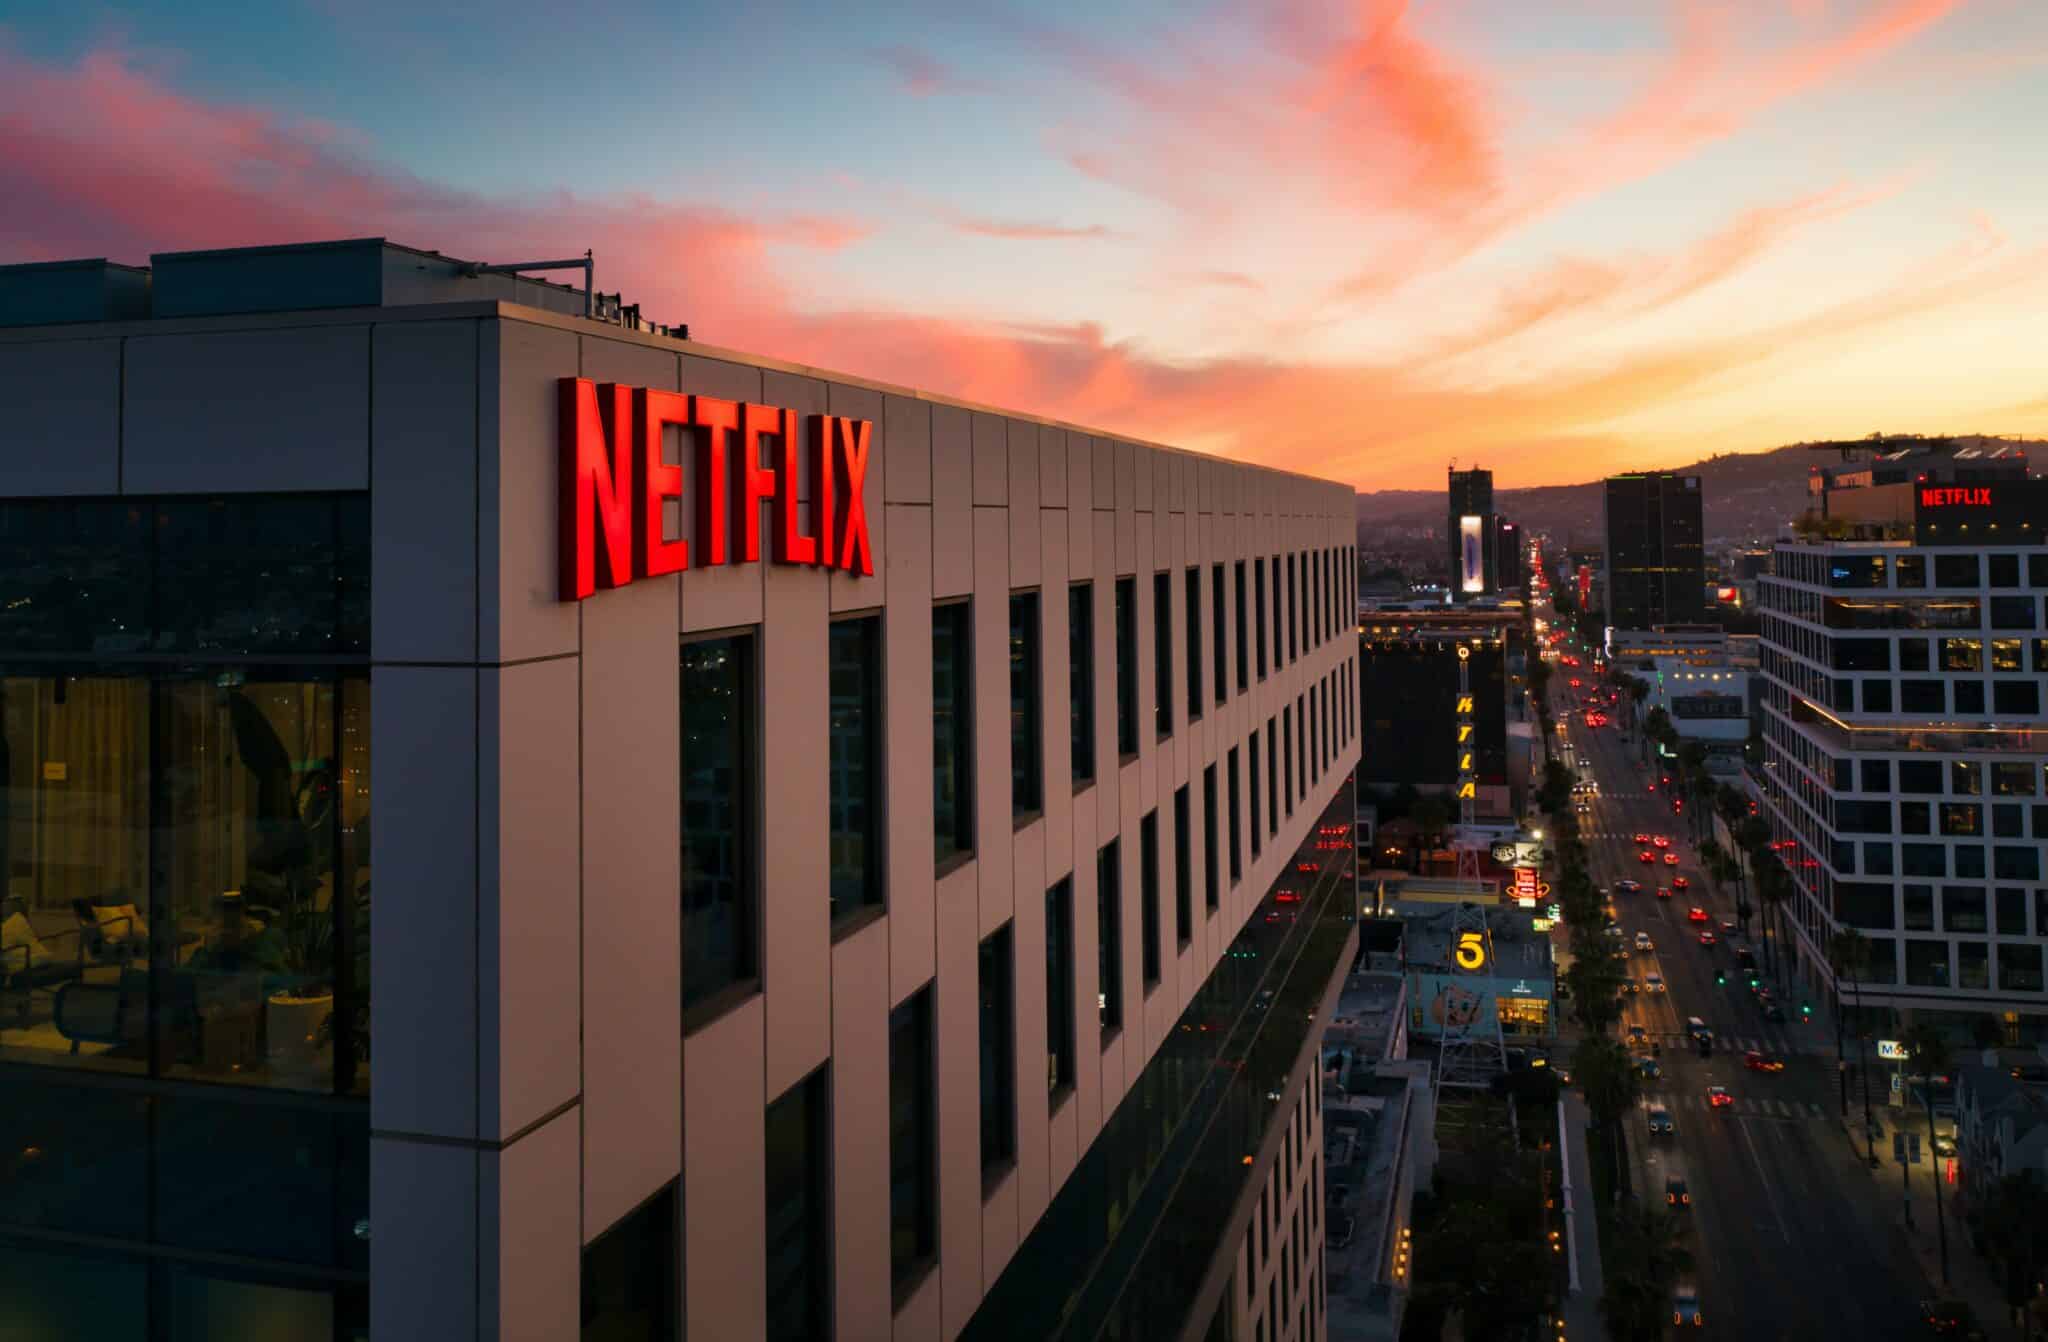 The Stock Price Of Netflix Has Dropped 35%, The Most Since 2004